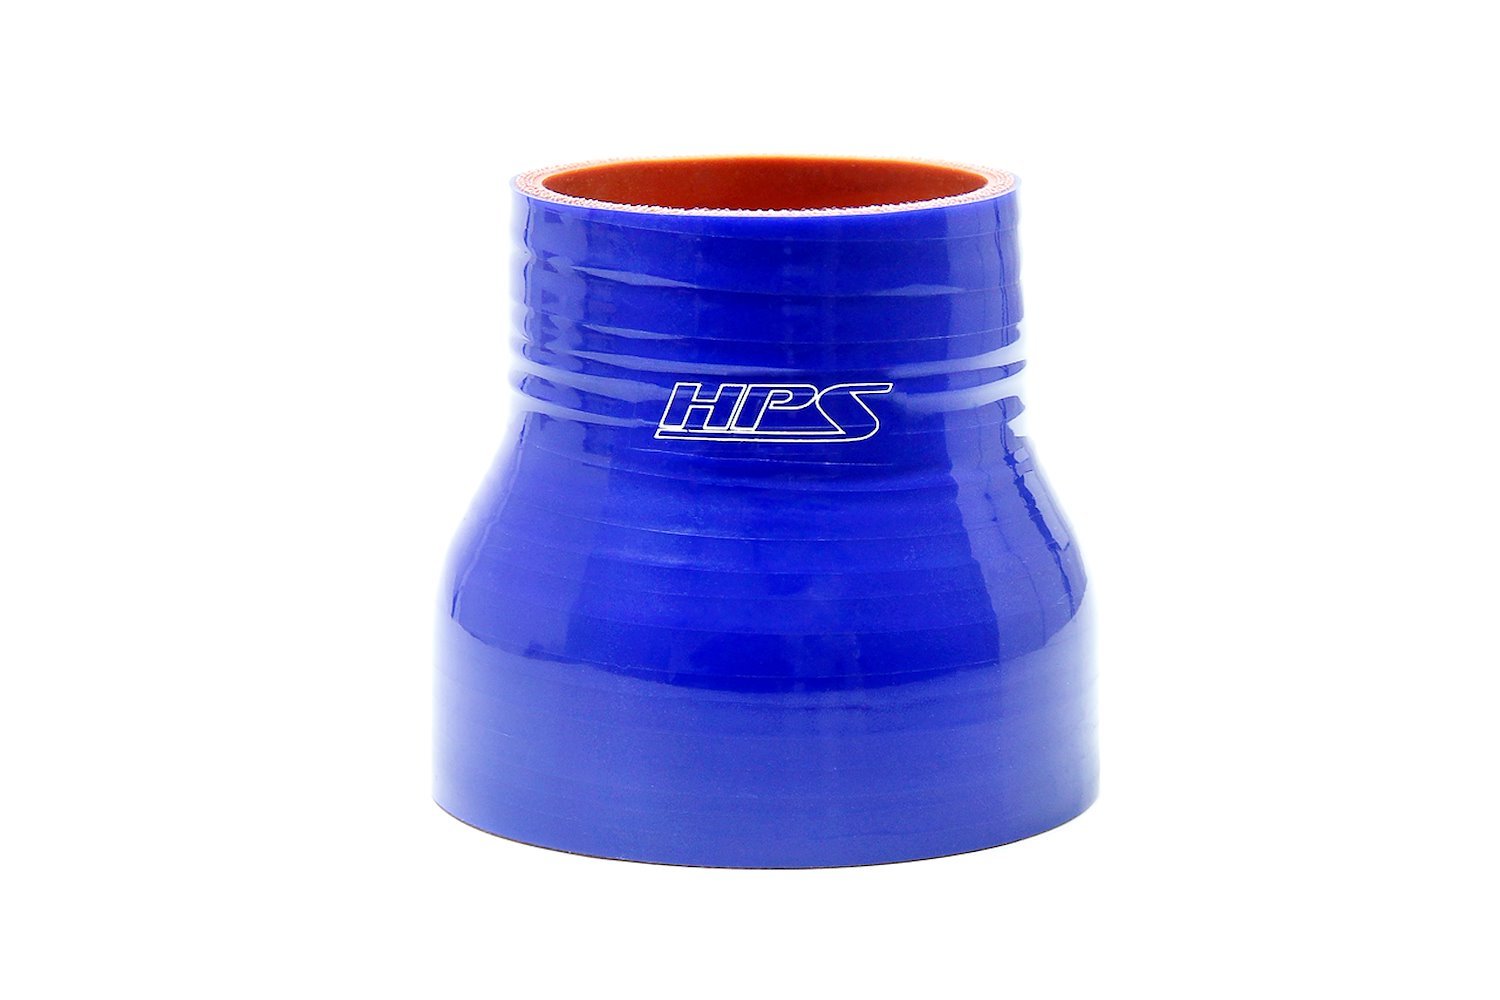 HTSR-200-212-BLUE Silicone Reducer Hose, High-Temp 4-Ply Reinforced, 2 in. - 2-1/8 in. ID, 3 in. Long, Blue